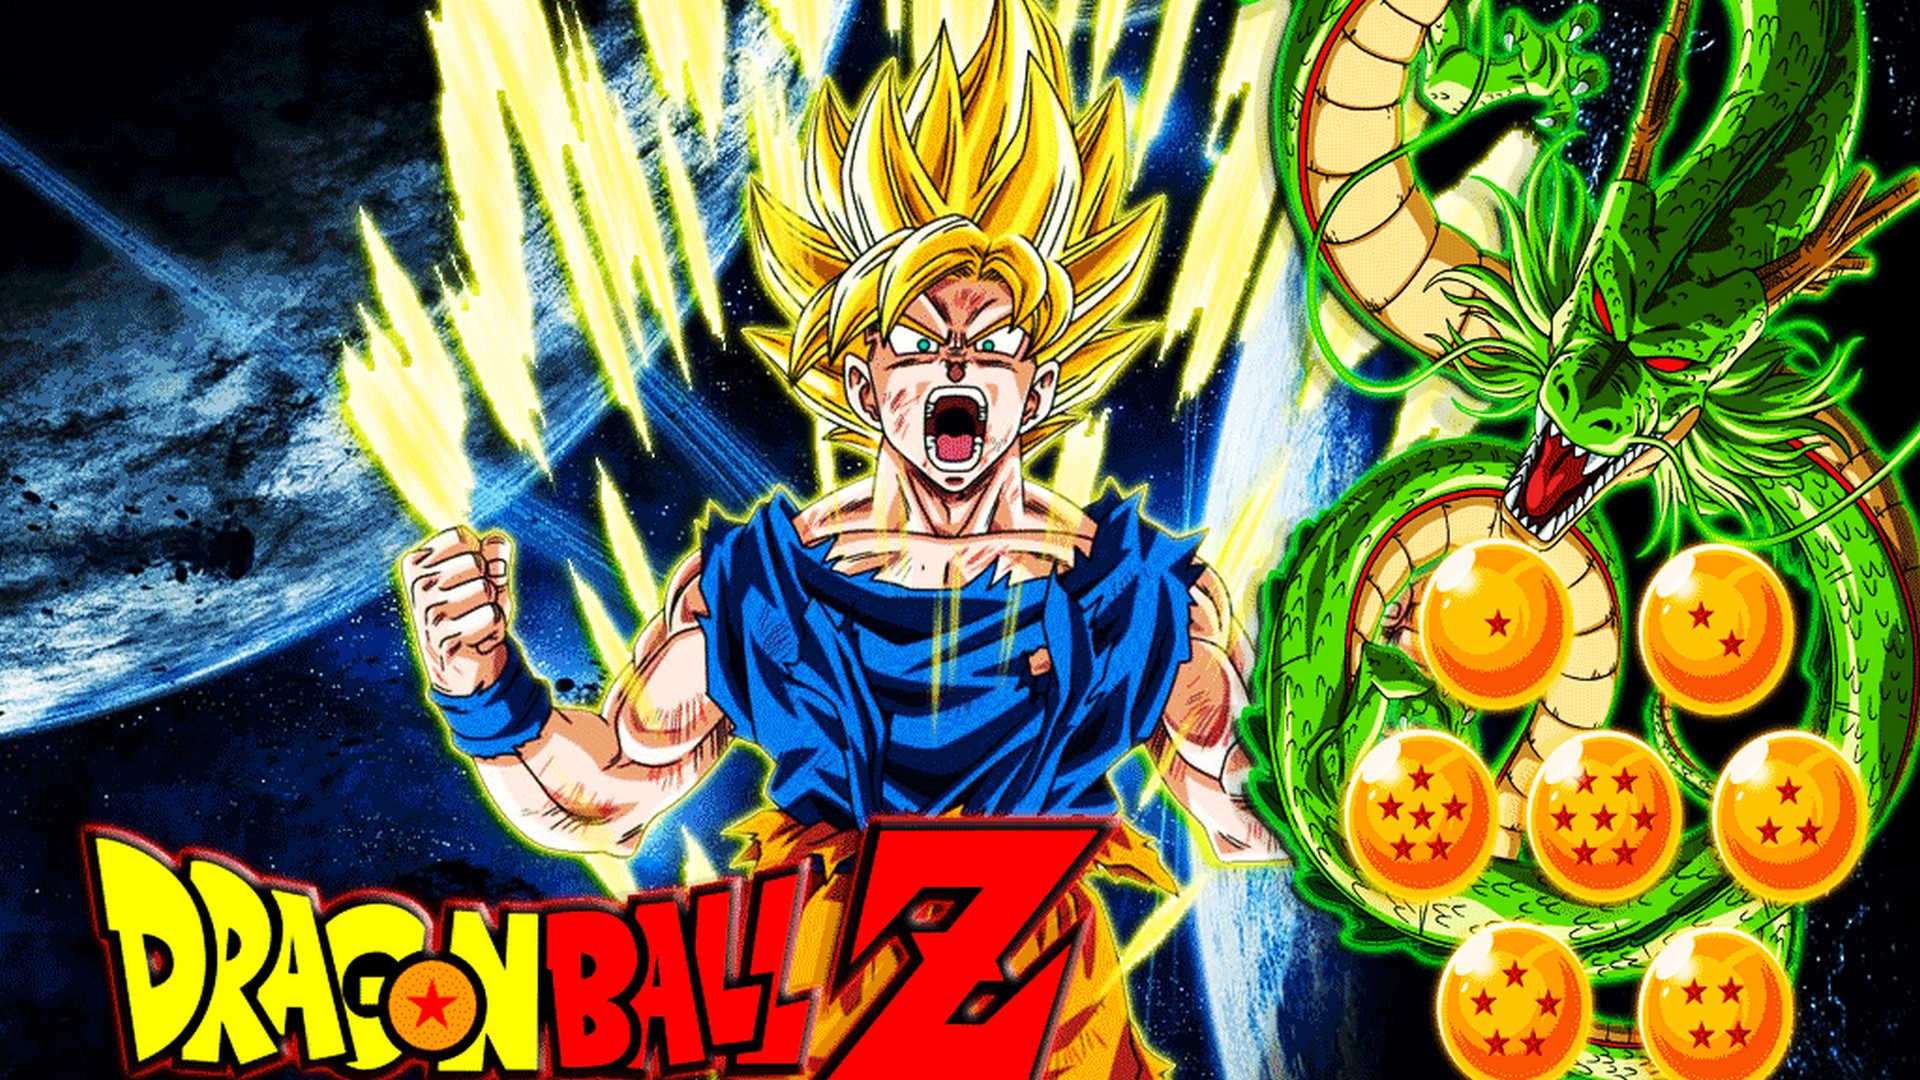 Best Goku Wallpaper HD with image resolution 1920x1080 pixel. You can make this wallpaper for your Desktop Computer Backgrounds, Mac Wallpapers, Android Lock screen or iPhone Screensavers